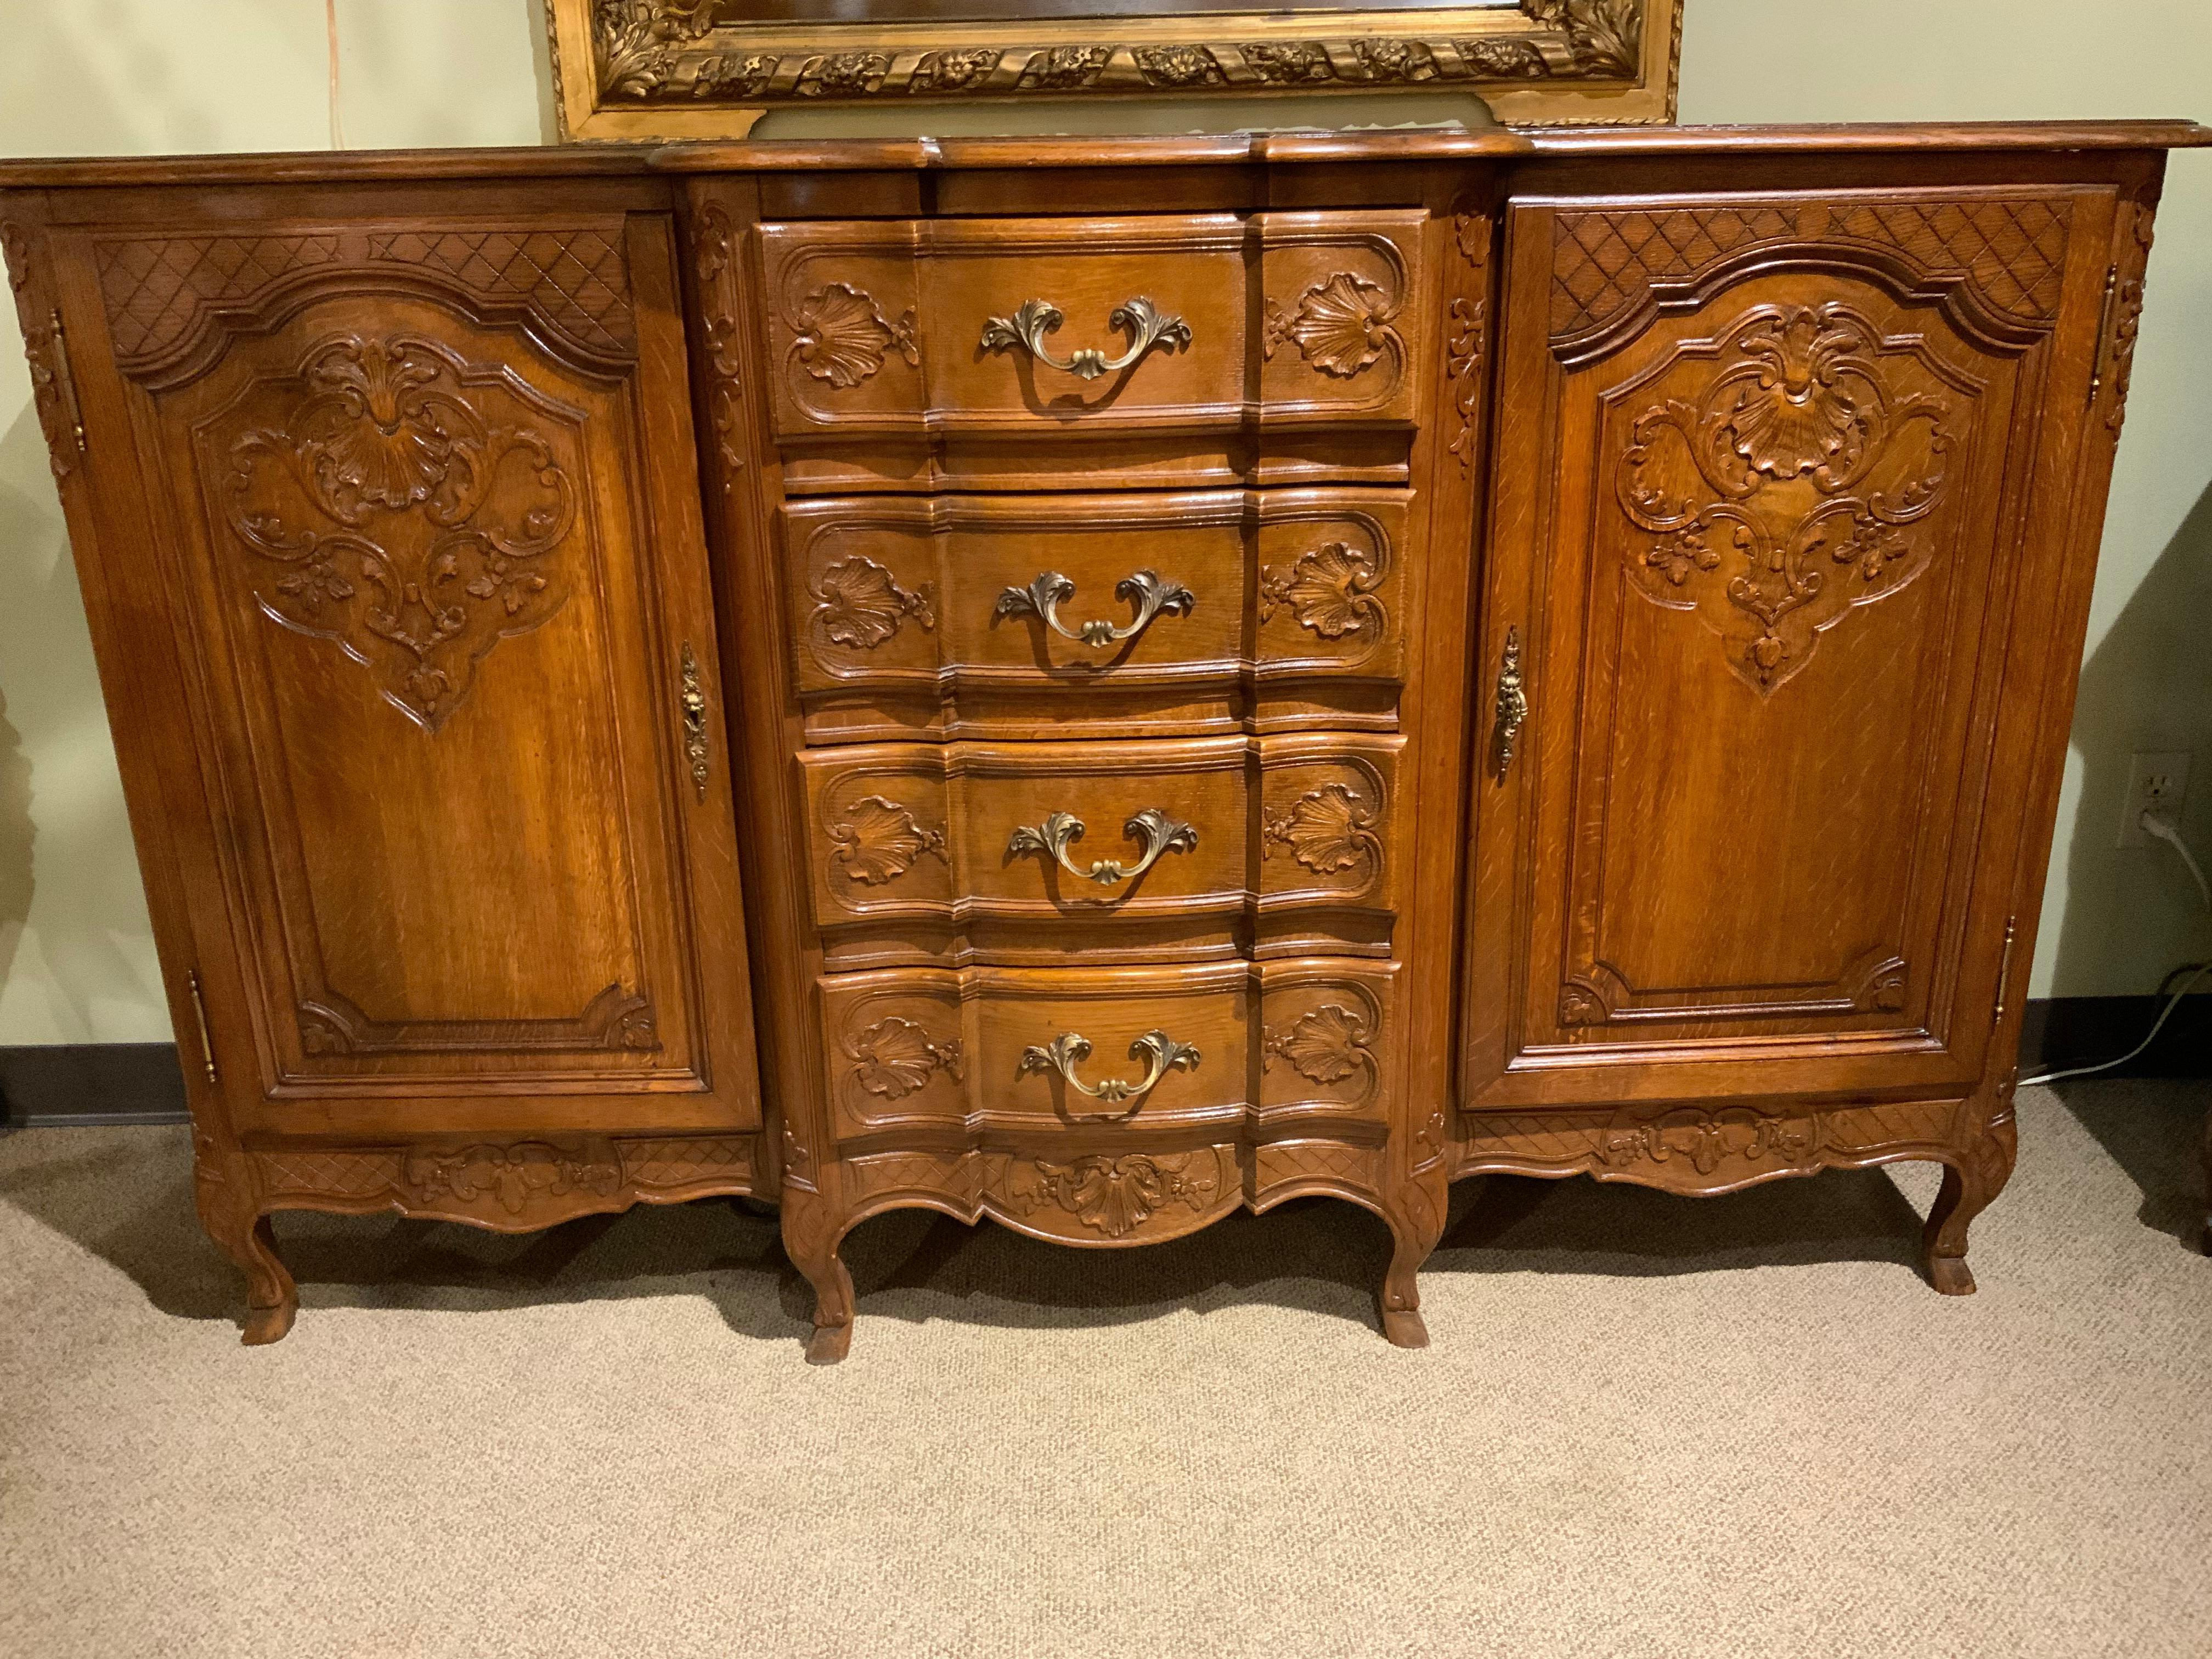 The exceptional condition and carving make this piece
Unique. It has four drawers down the center for good storage 
And cabinets on each side with doors that open to two
Shelves on each side. The patina is a warm rich hue in a
Fine oak finish. No